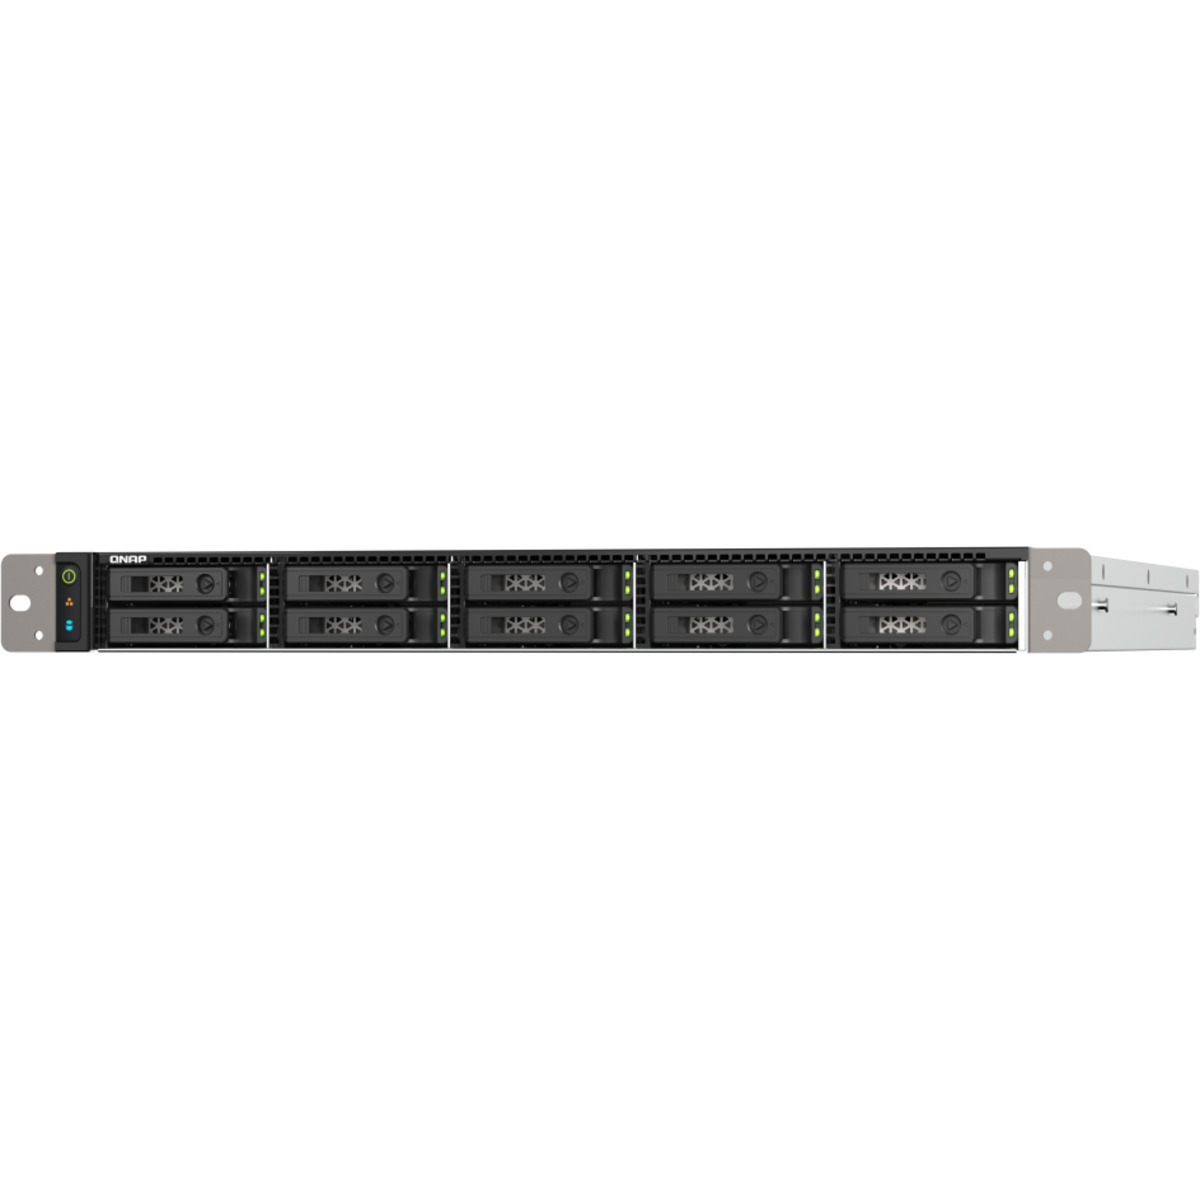 QNAP TS-h1090FU-7302P 2tb 10-Bay RackMount Large Business / Enterprise NAS - Network Attached Storage Device 8x250gb Western Digital Red SN700 WDS250G1R0C  3100/1600MB/s M.2 2280 NVMe SSD NAS Class Drives Installed - Burn-In Tested TS-h1090FU-7302P